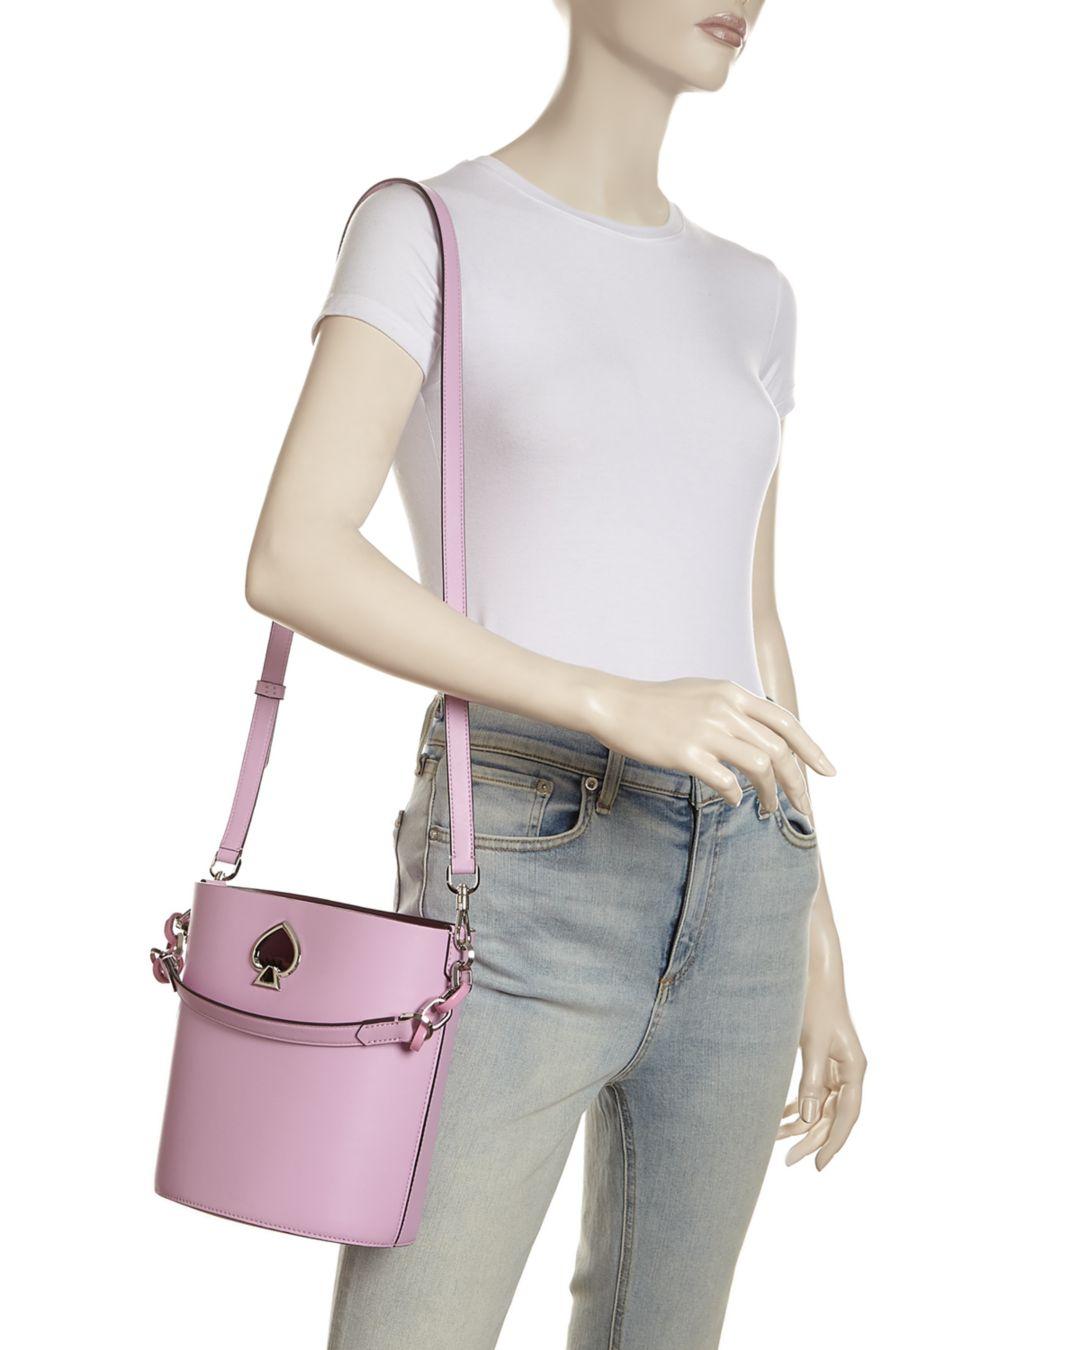 Kate Spade Suzy Small Leather Bucket Bag - Lyst